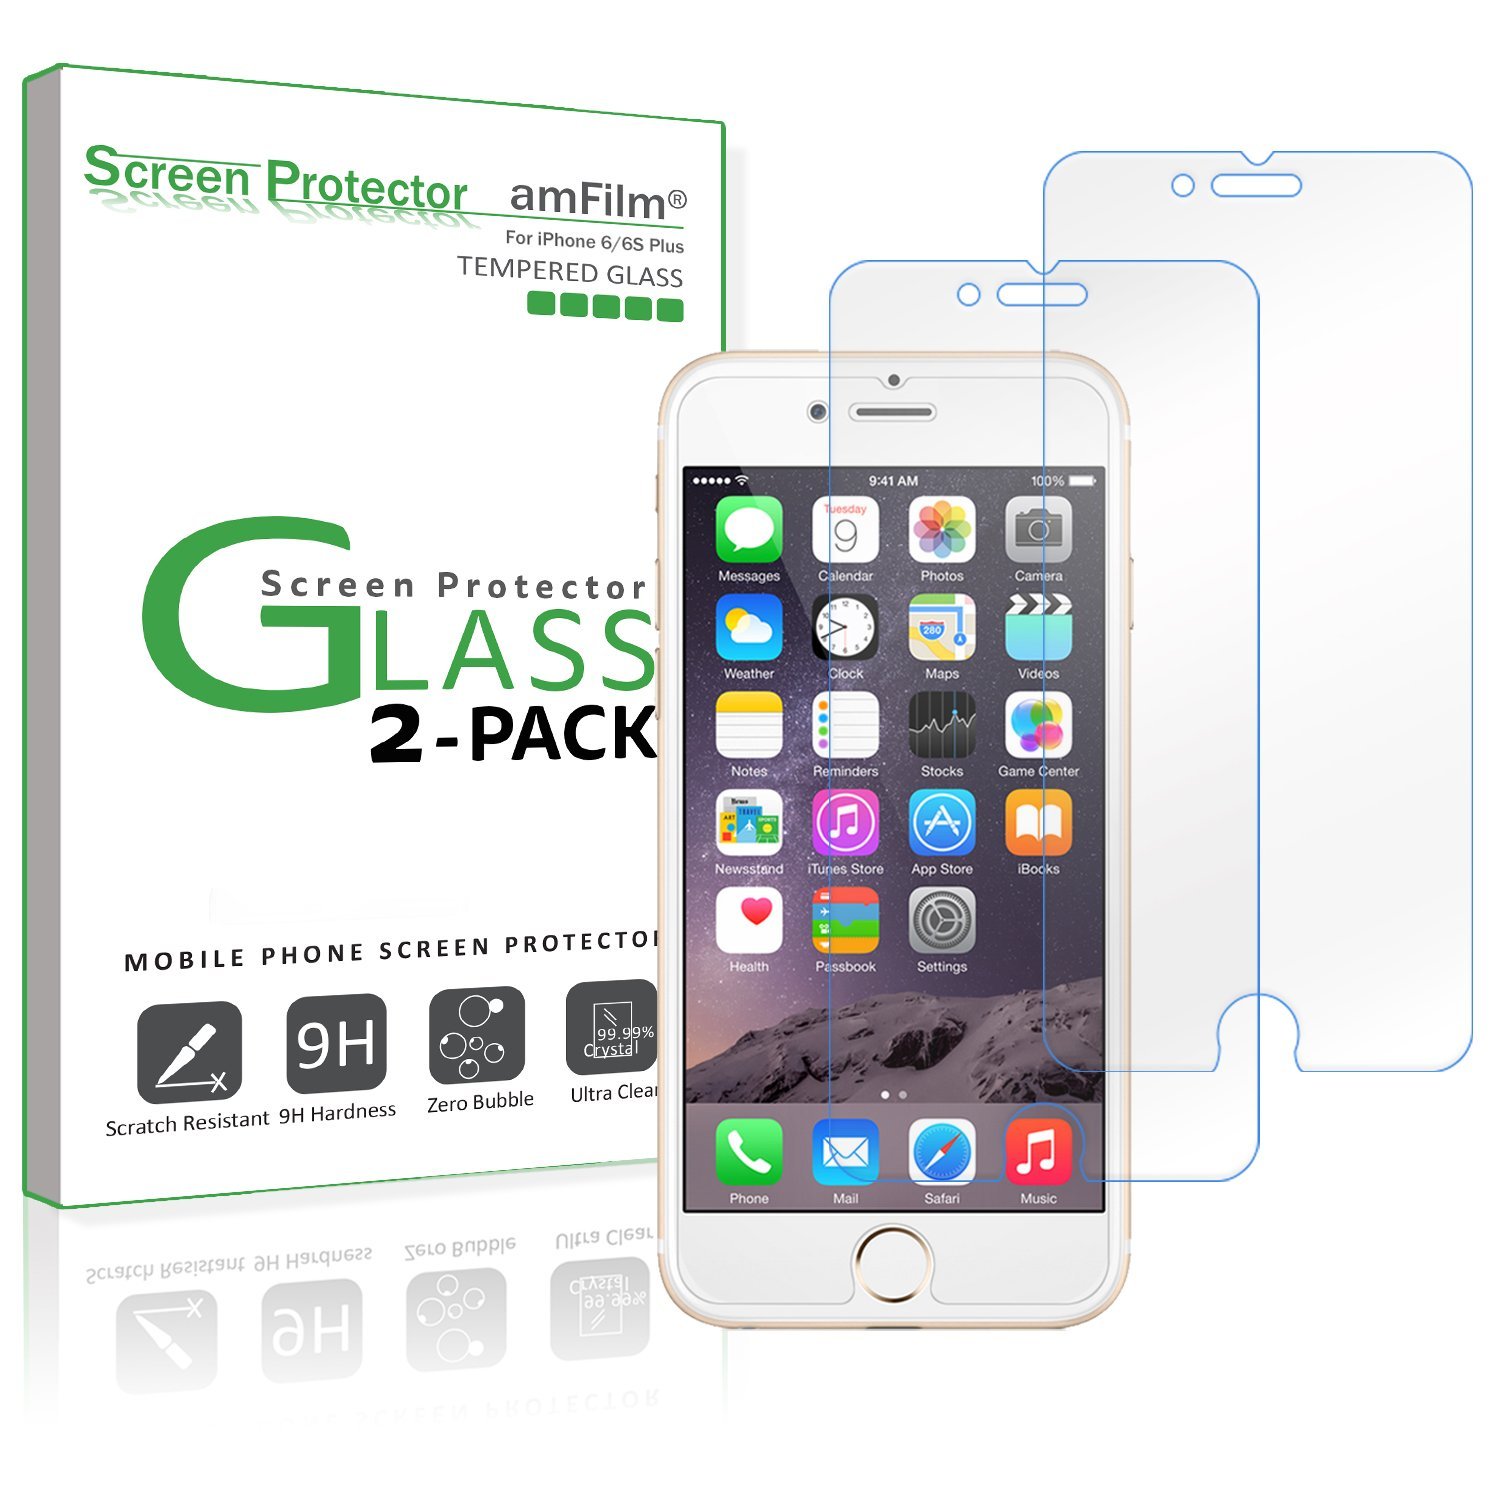 iPhone 6S Plus Tempered Glass Screen Protector (2-Pack)—$6.29!